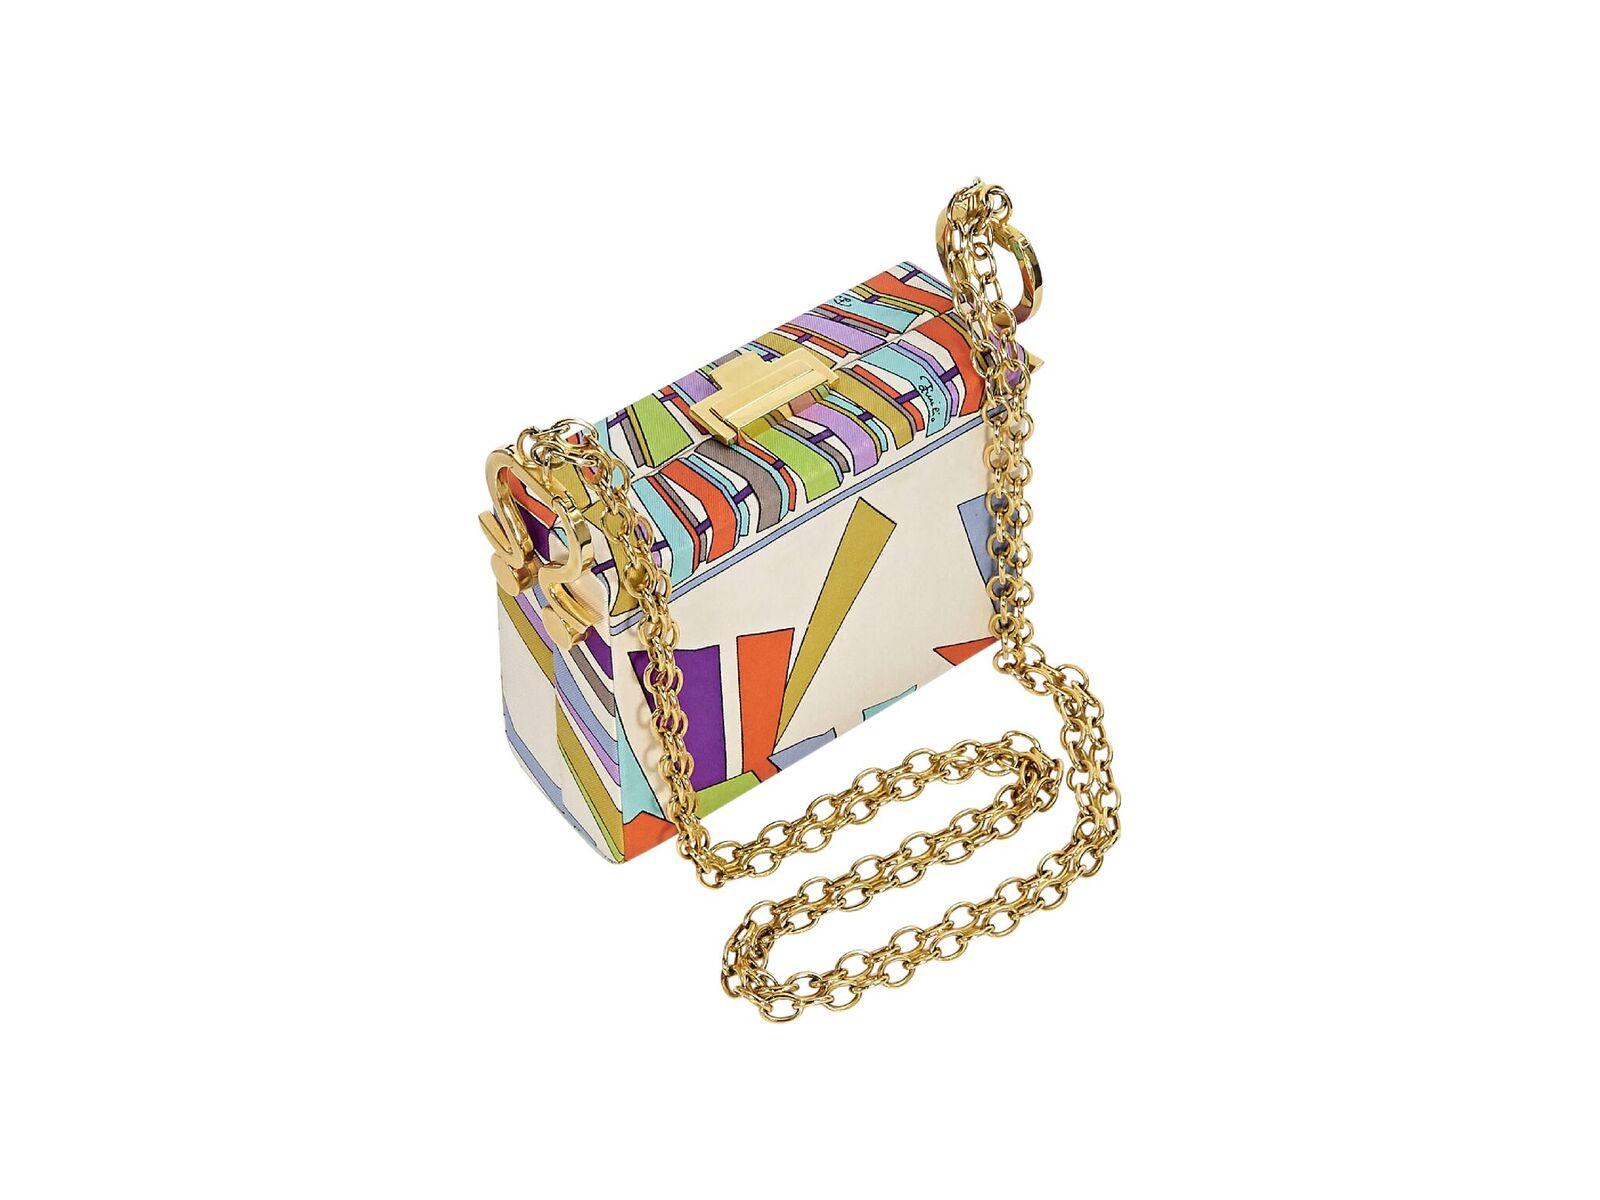 Product details:  Multicolor printed small box crossbody bag by Emilio Pucci.  Chain crossbody strap.  Top clasp closure.  Leather interior with inner slide pocket.  Protective metal feet.  Goldtone hardware.  
Condition: Pre-owned. Good. Small